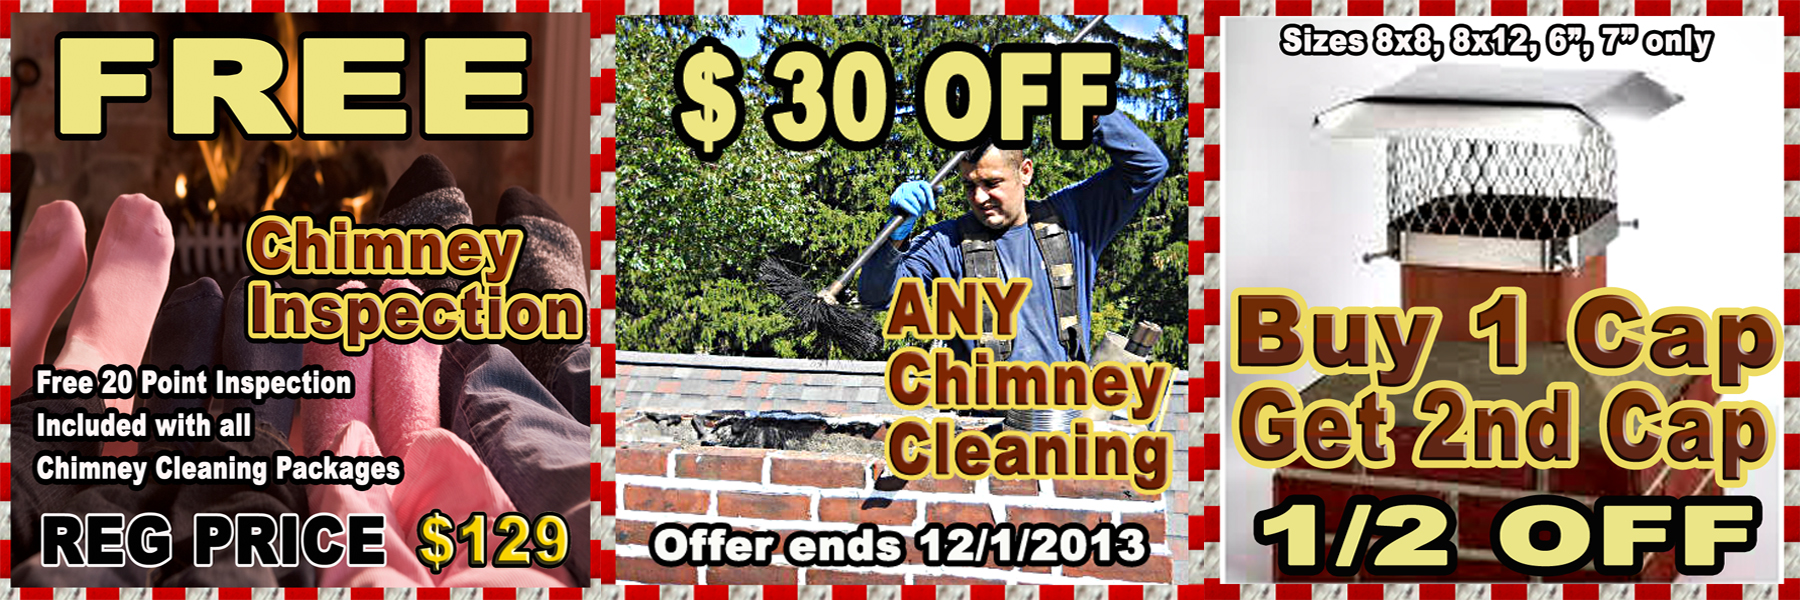 ProLine Chimney Cleaning Chimney Inspection Chimney Cap Coupon